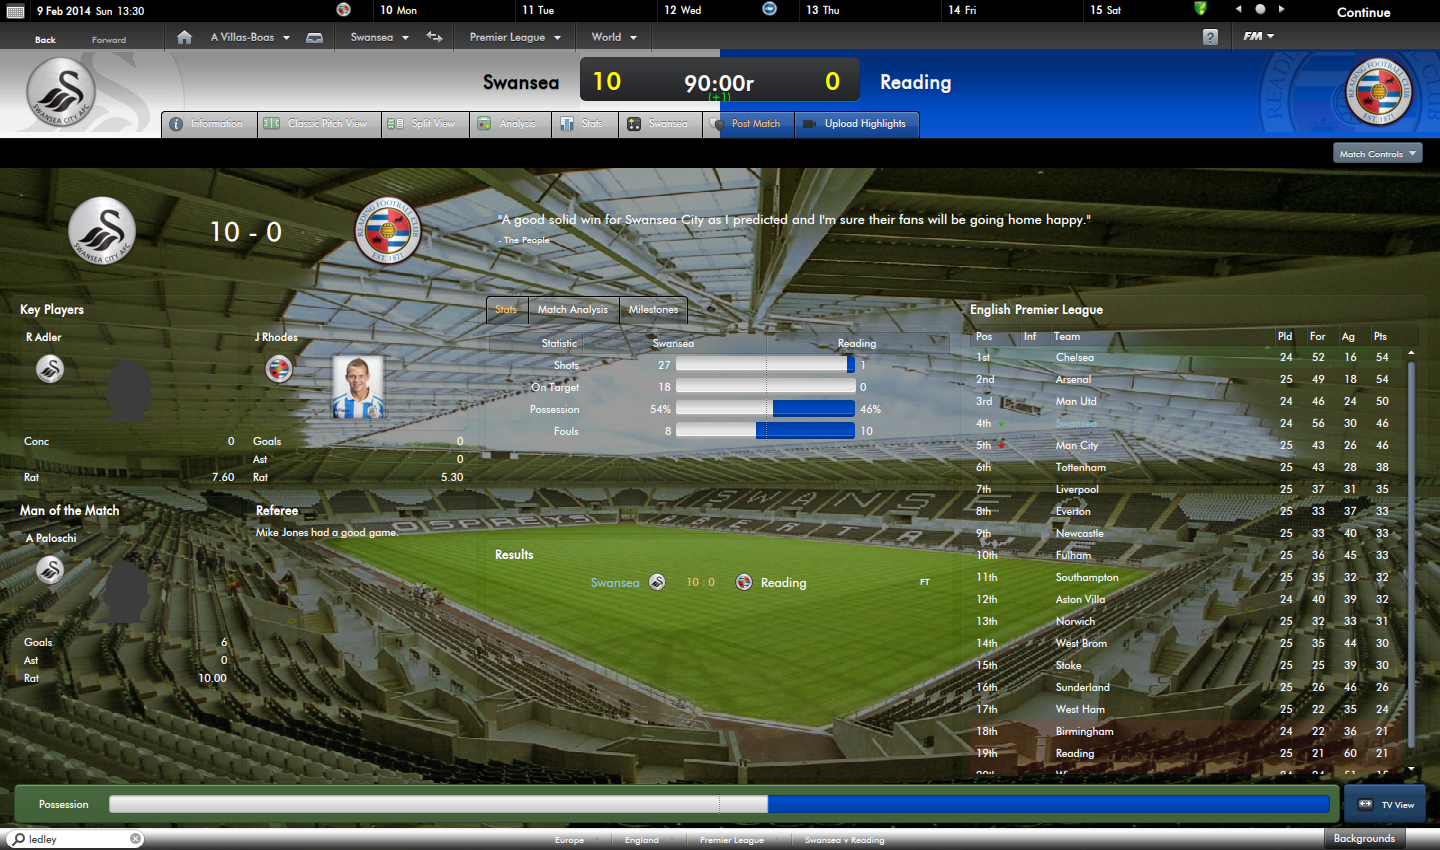 4fbe8cbbc0758-Swansea_v_Reading_%28Post_Match%29.png